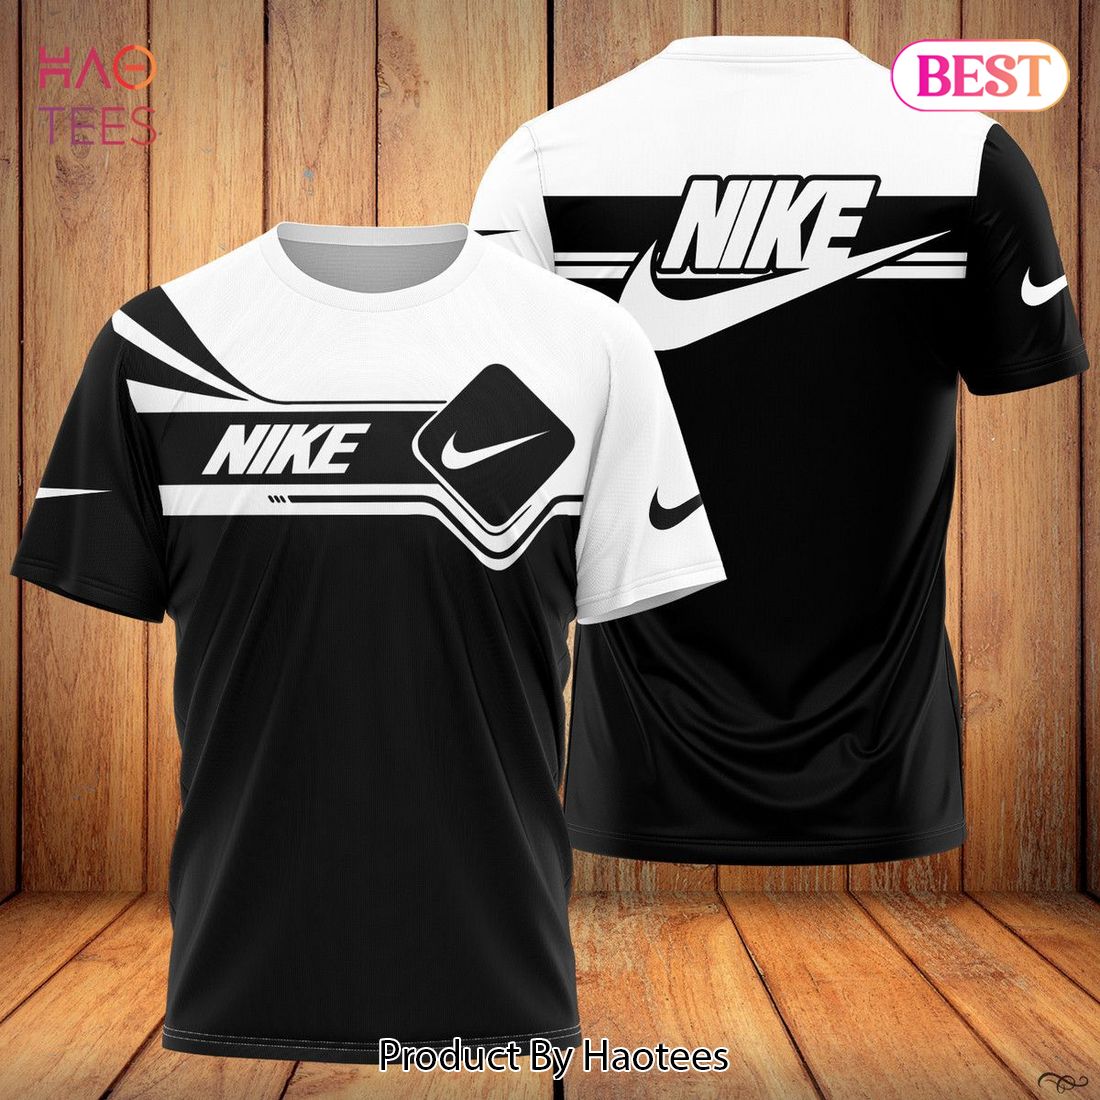 Nike Black White Luxury Brand Inspired 3D Personalized Customized 3D T-Shirt